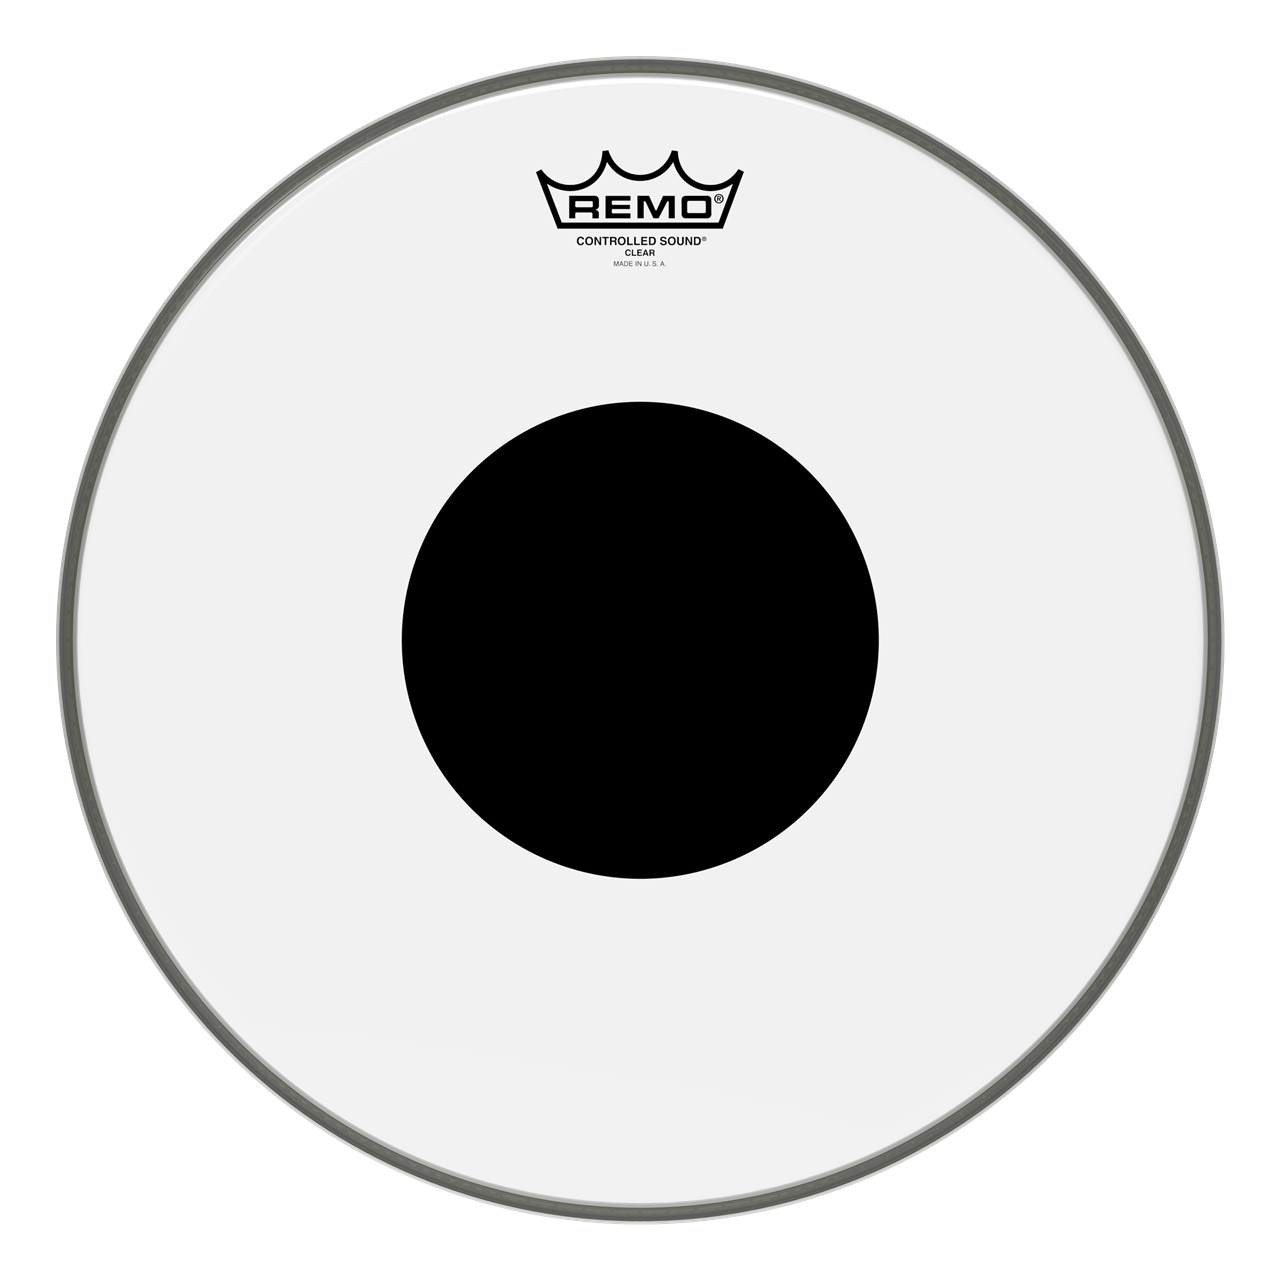 Remo CS-0314-10 Controlled Sound, 14" Clear, Black Dot